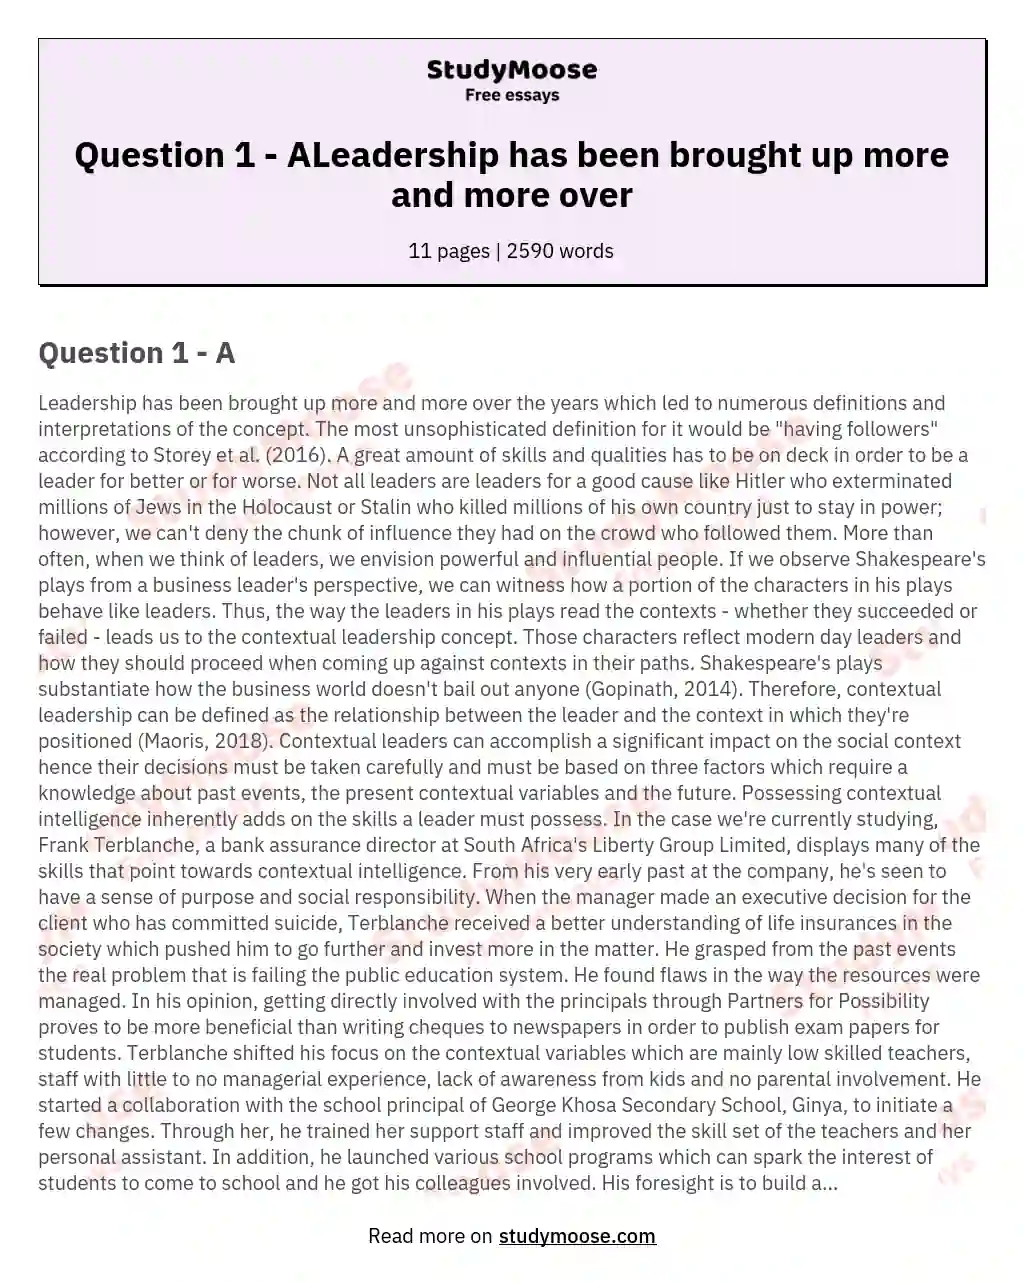 Question 1 - ALeadership has been brought up more and more over